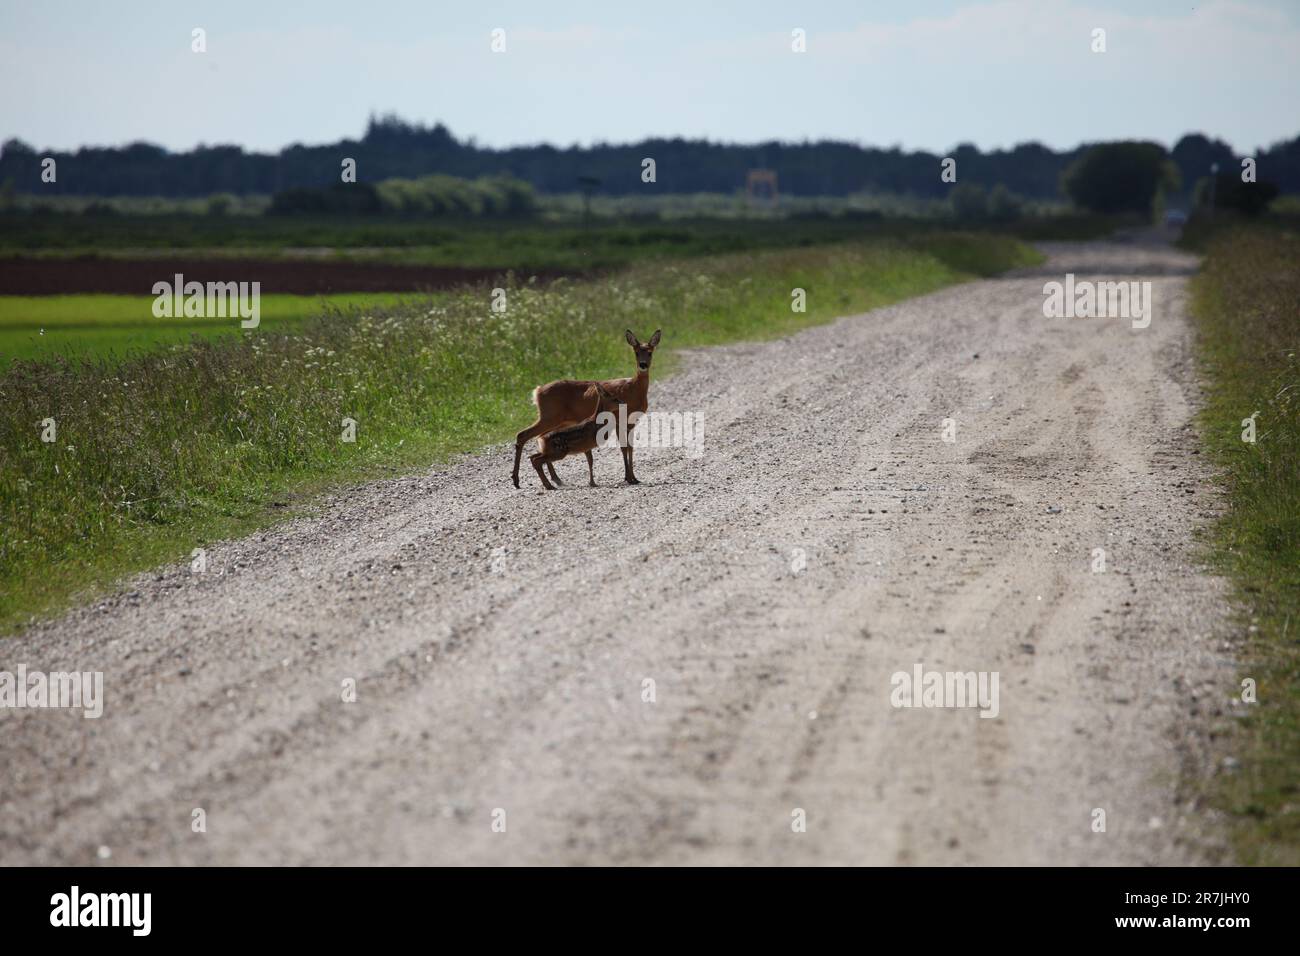 A majestic white-tailed deer with its fawn cautiously treads along a rural roadside, its large ears standing alert as it surveys its surroundings Stock Photo